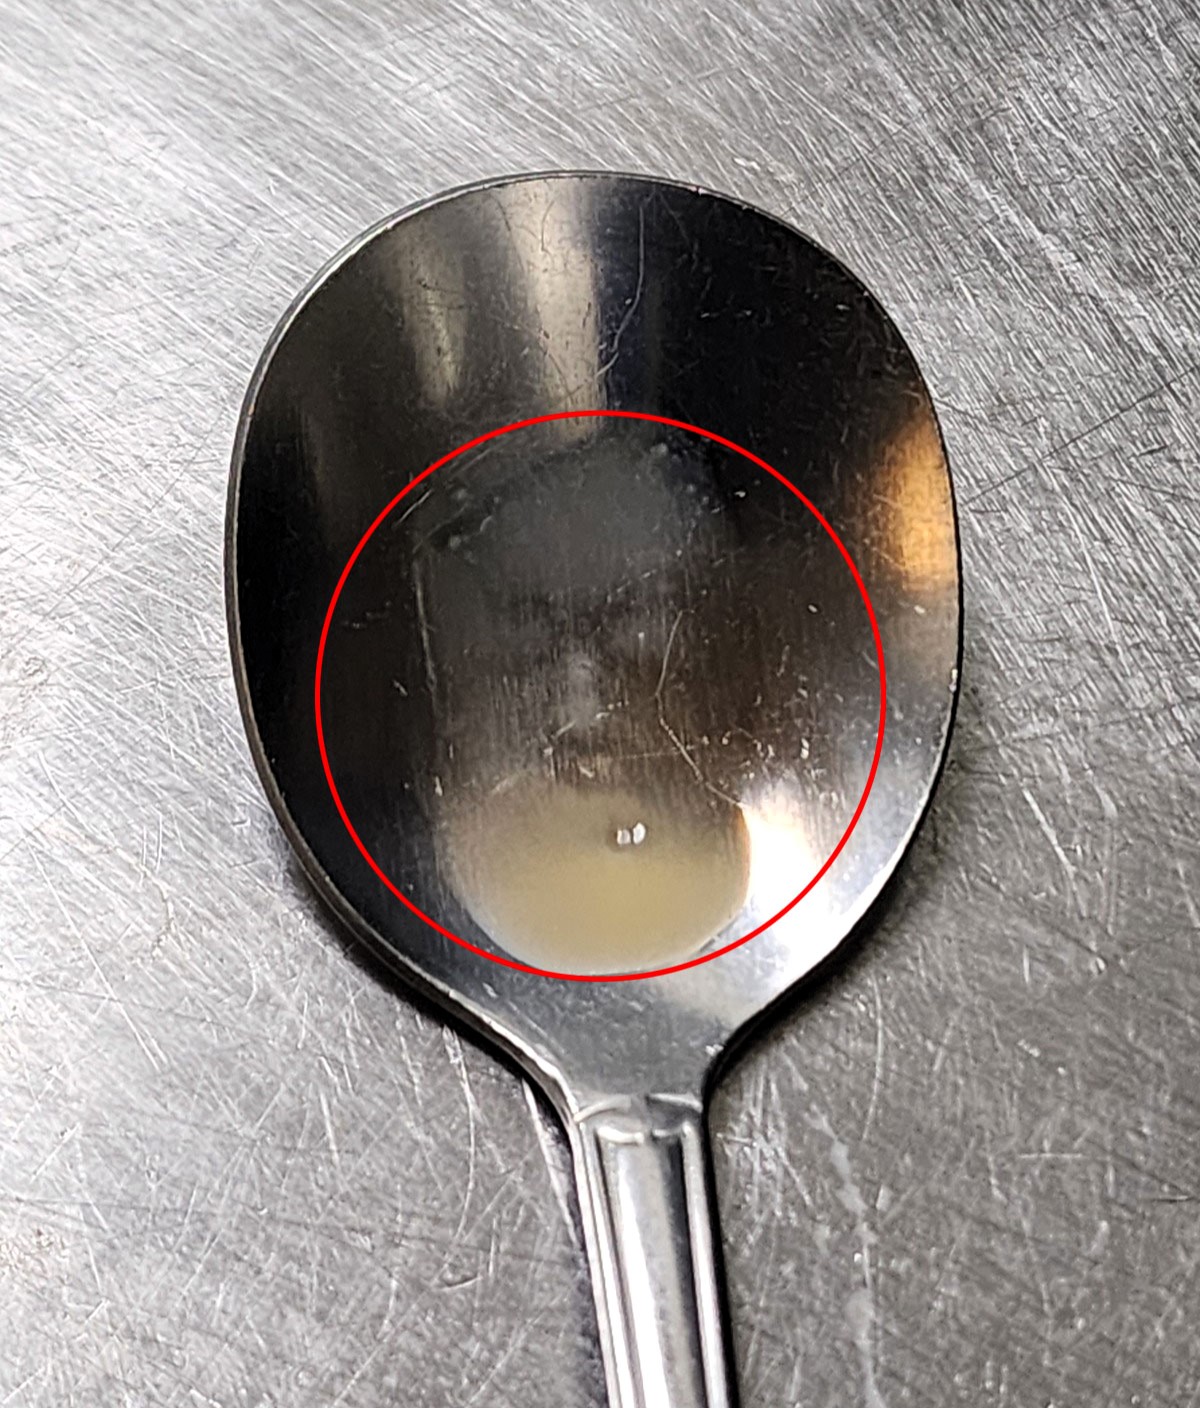 Experience the eerie moment when a 'haunted' teaspoon captures attention online, sparking debates over its resemblance to various figures.